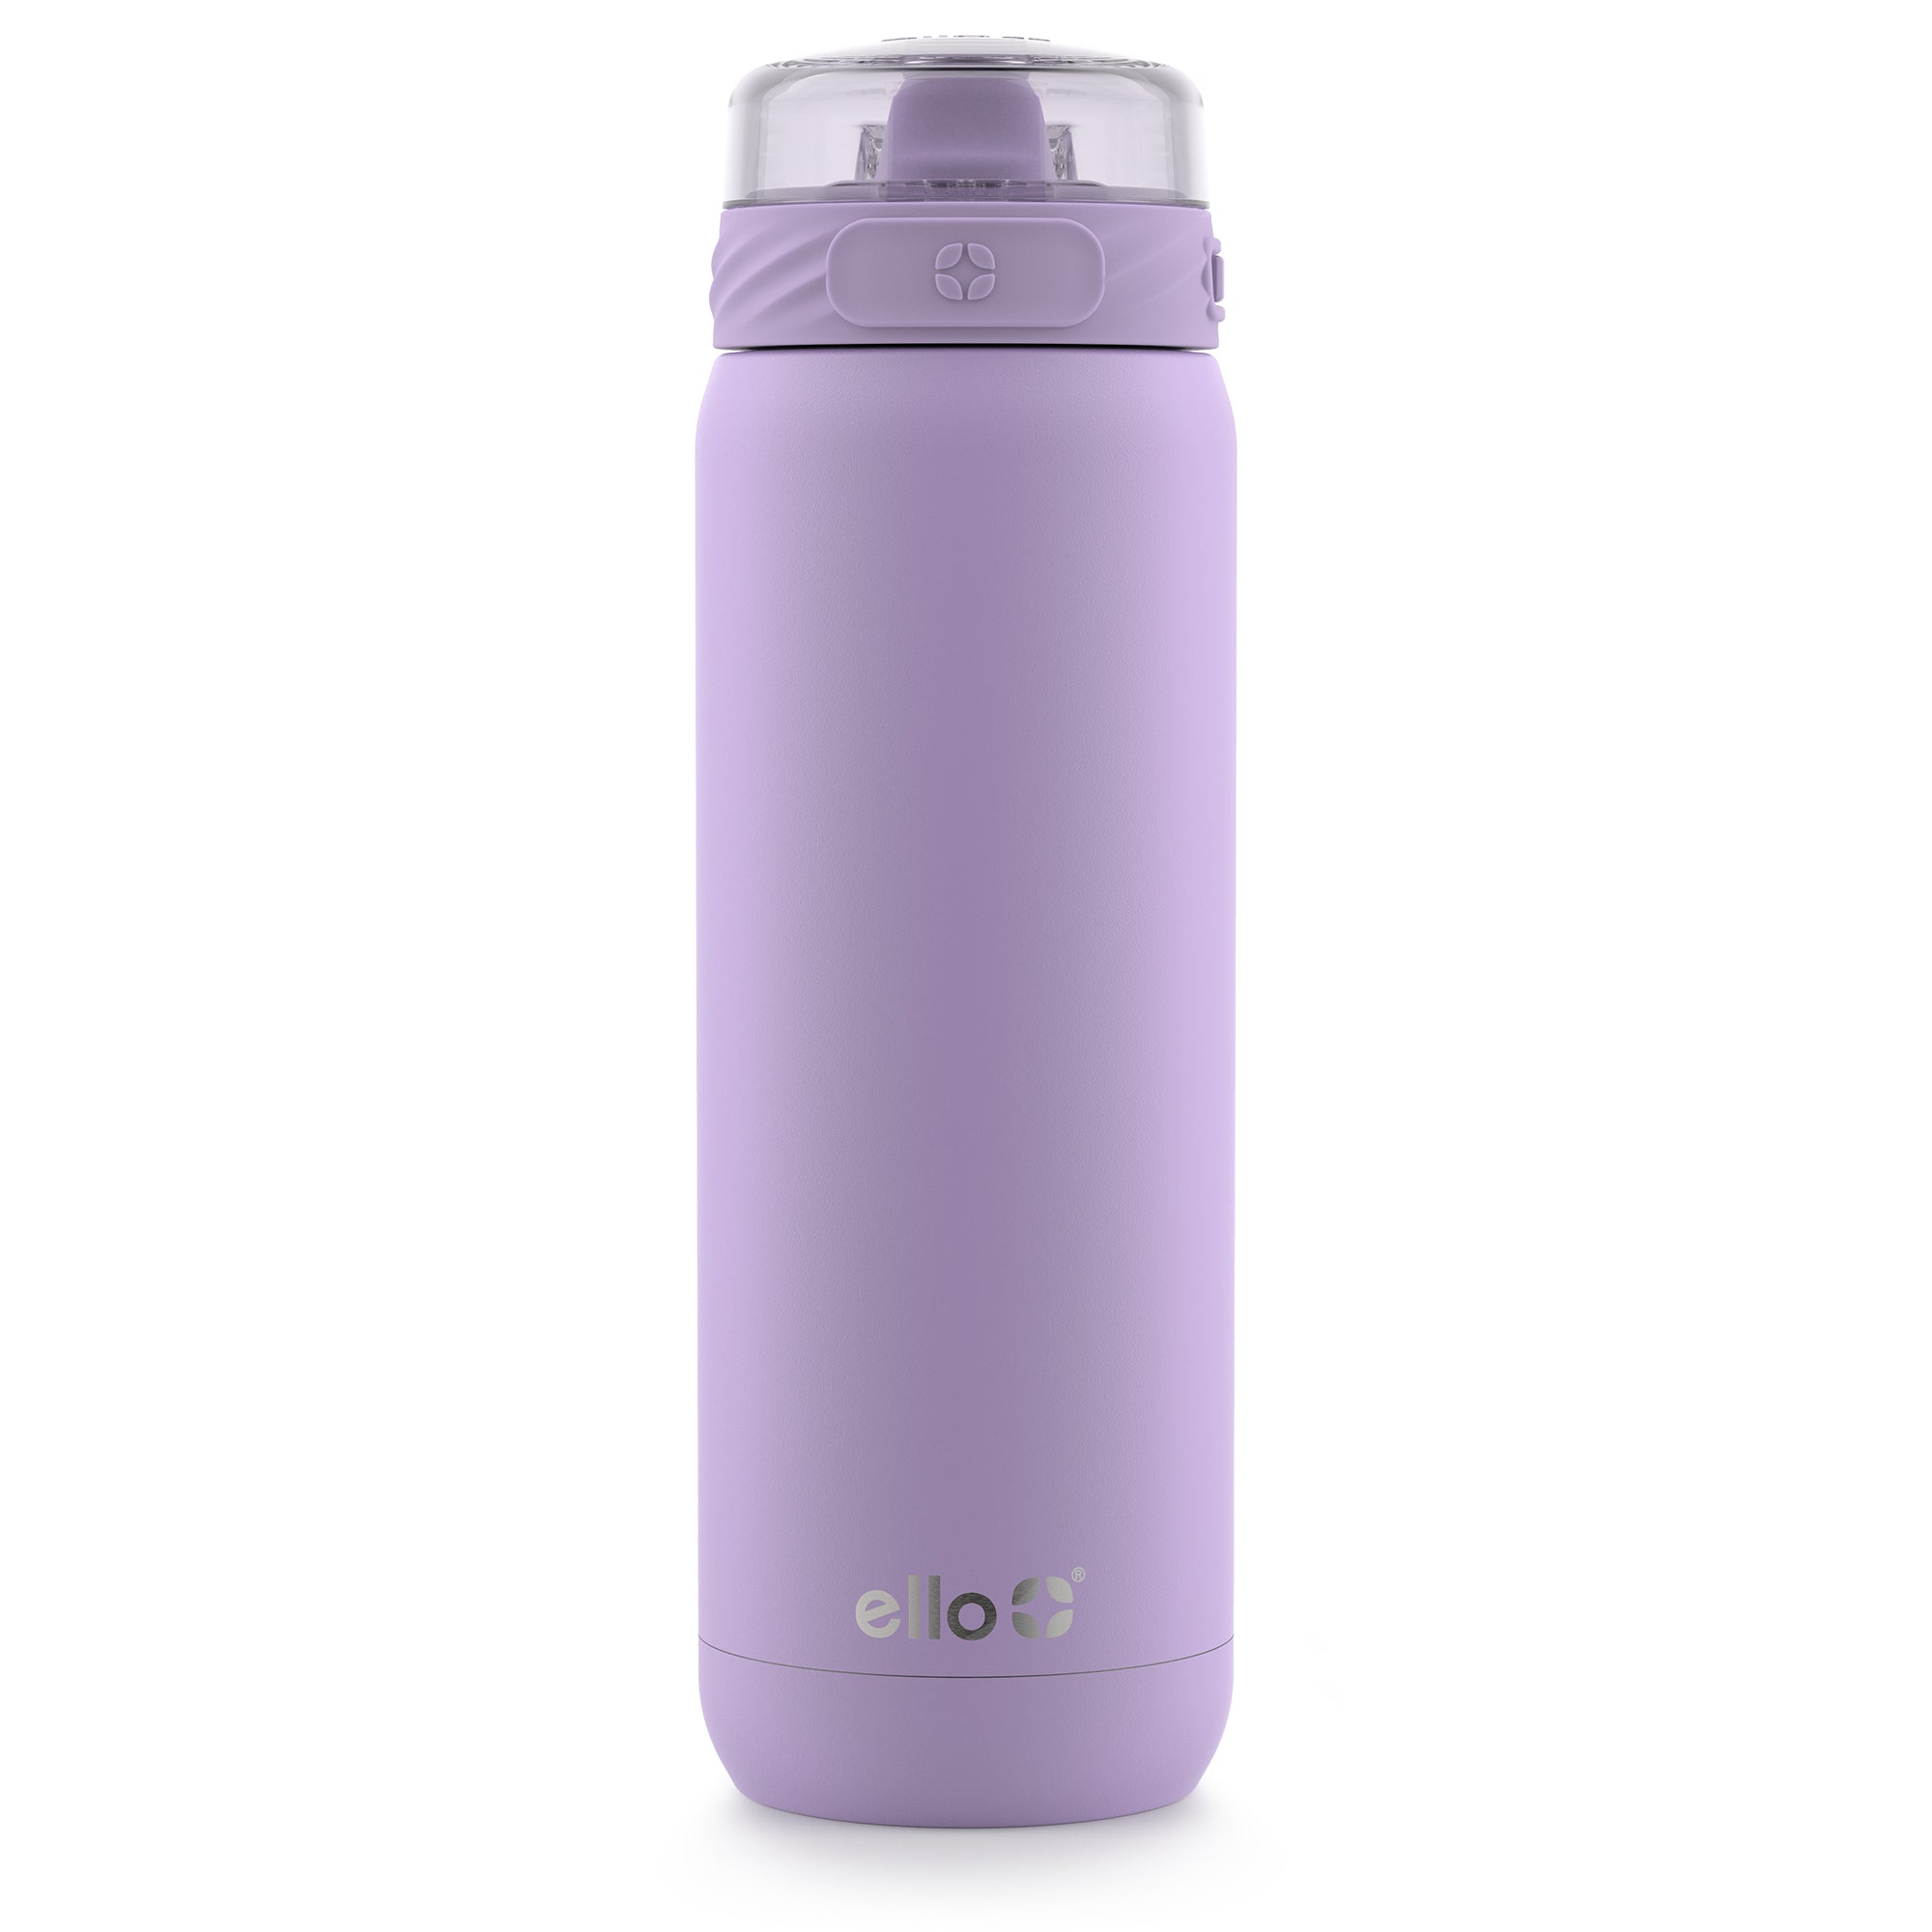 Ello Cooper Vacuum Insulated Stainless Steel Water Bottle with